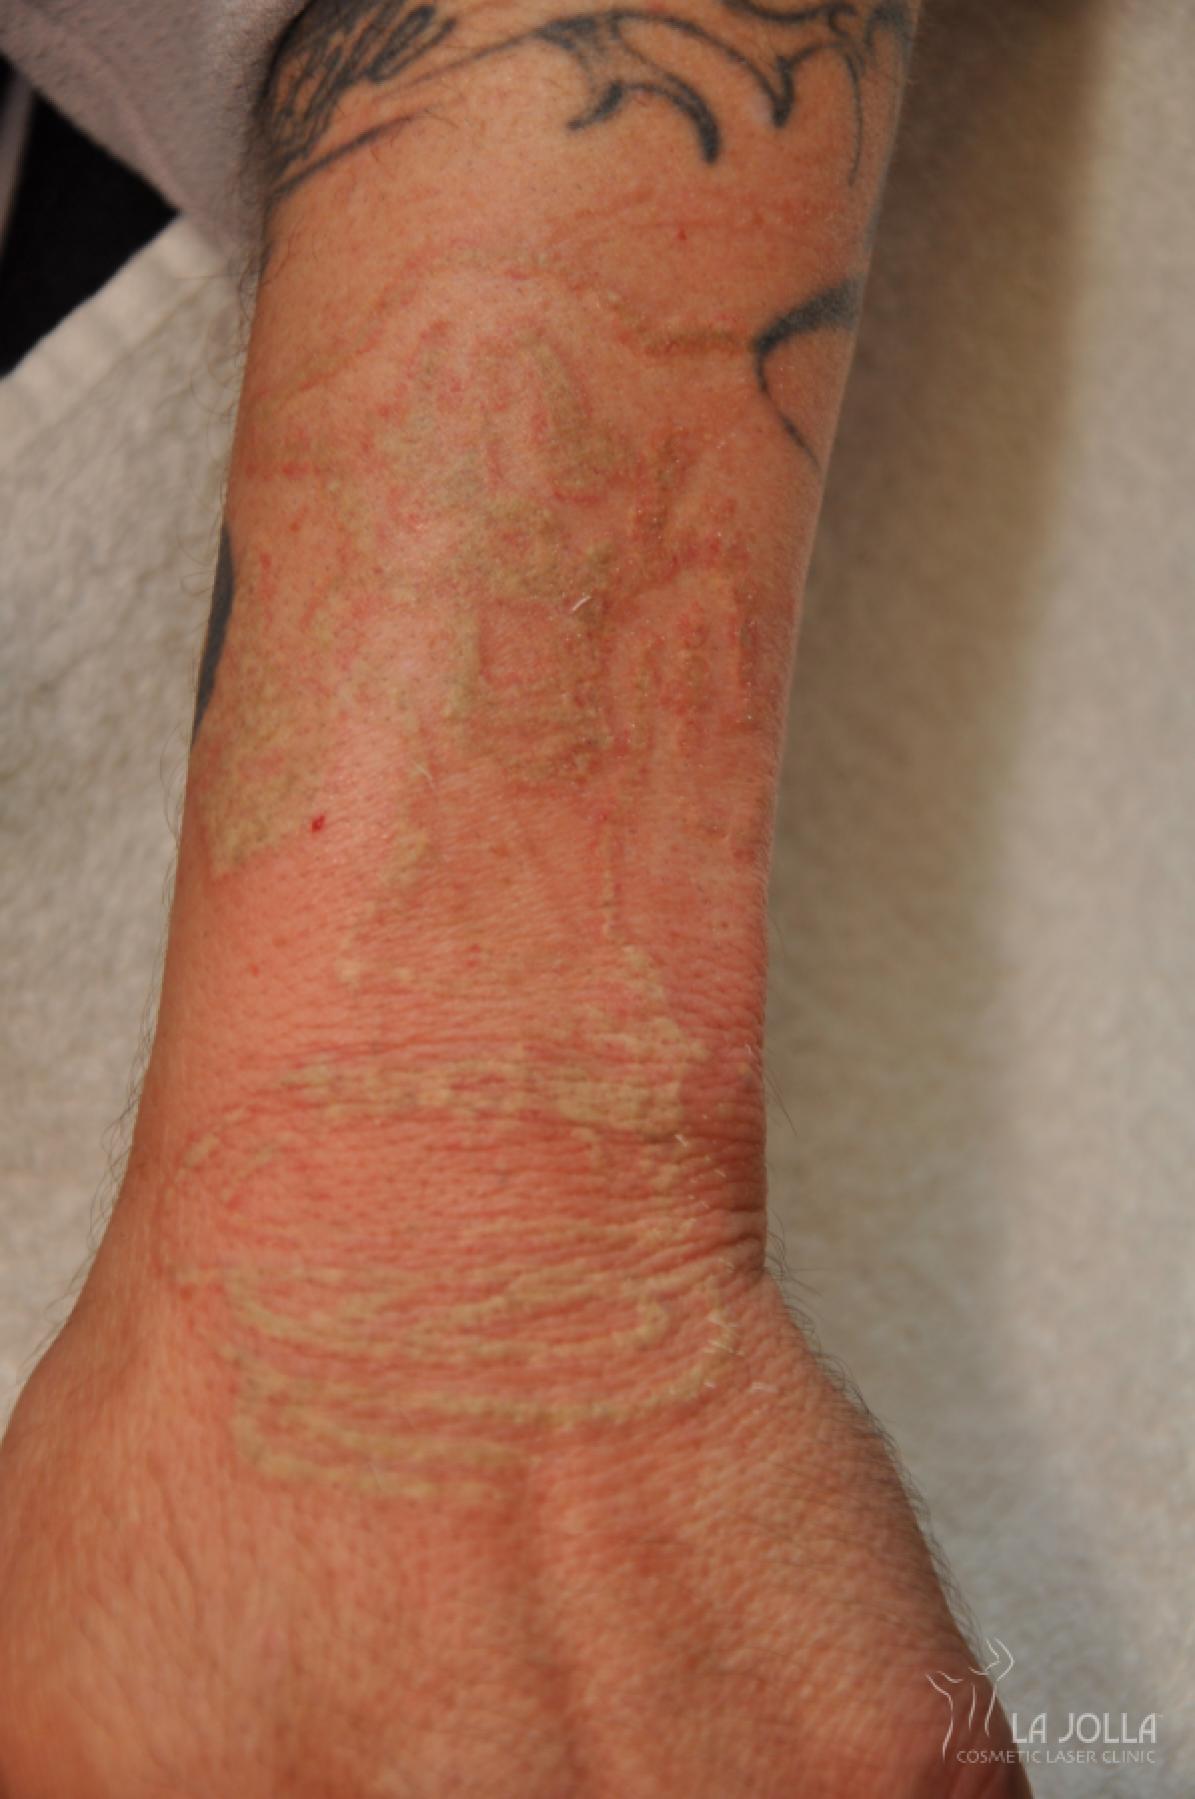 Laser Tattoo Removal Patient 1 After Procedure